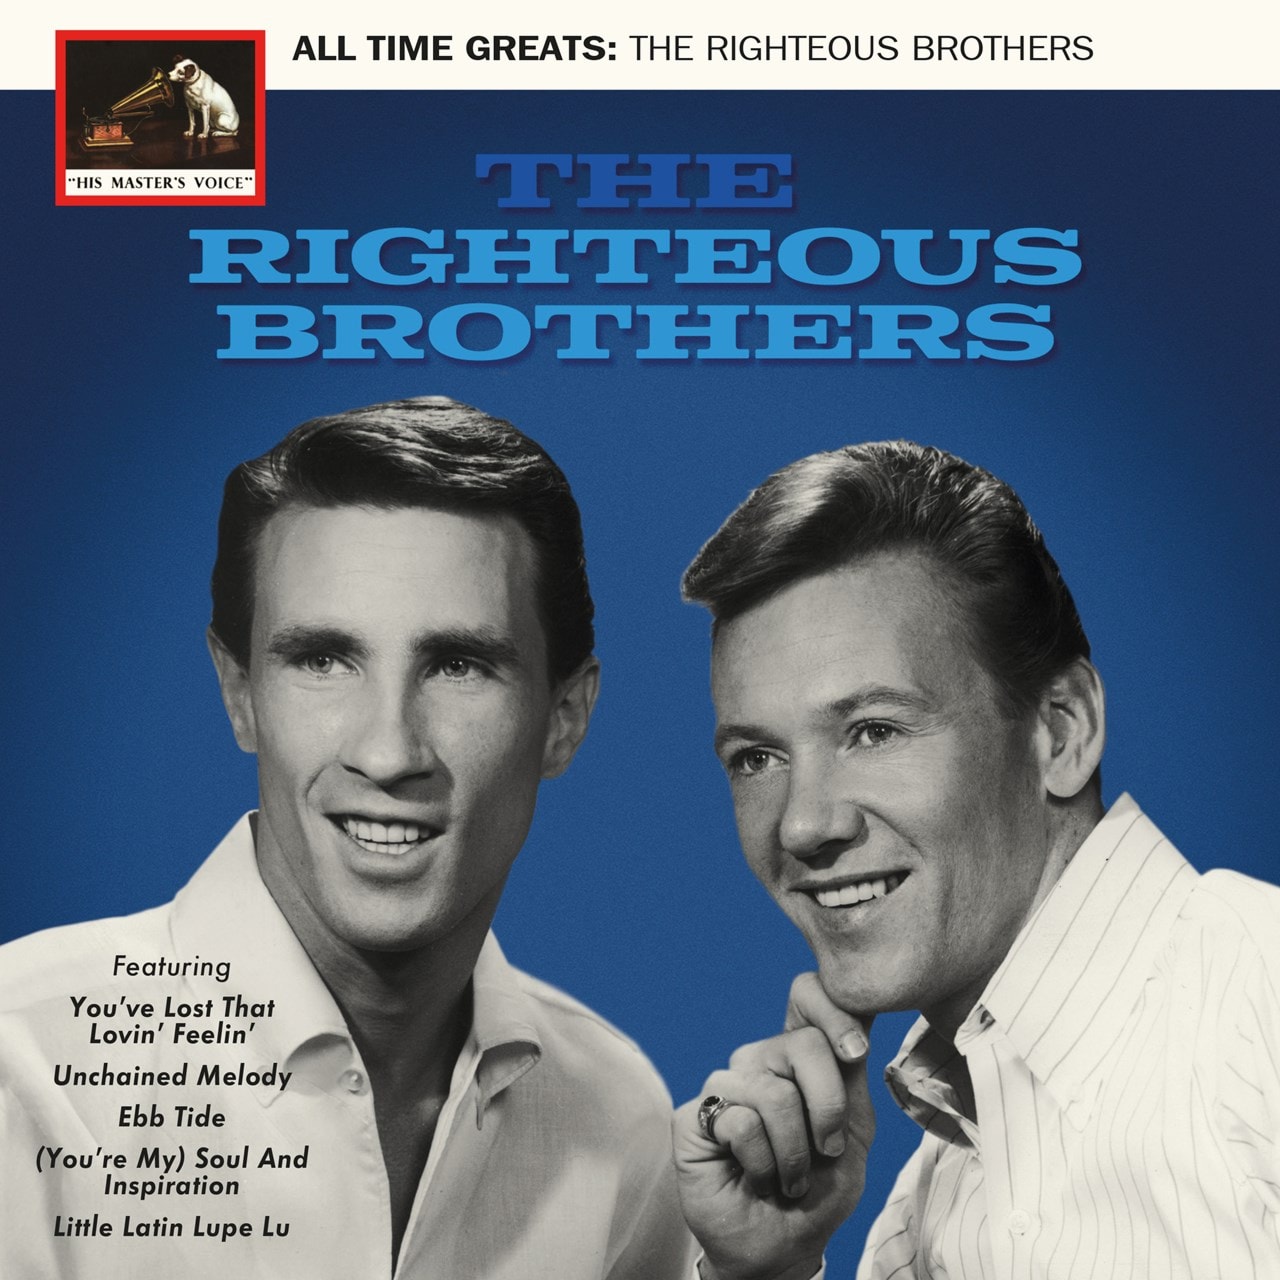 The righteous brothers unchained melody. The Righteous brothers. Группа the Righteous brothers. The Righteous brothers и Элвис Пресли.